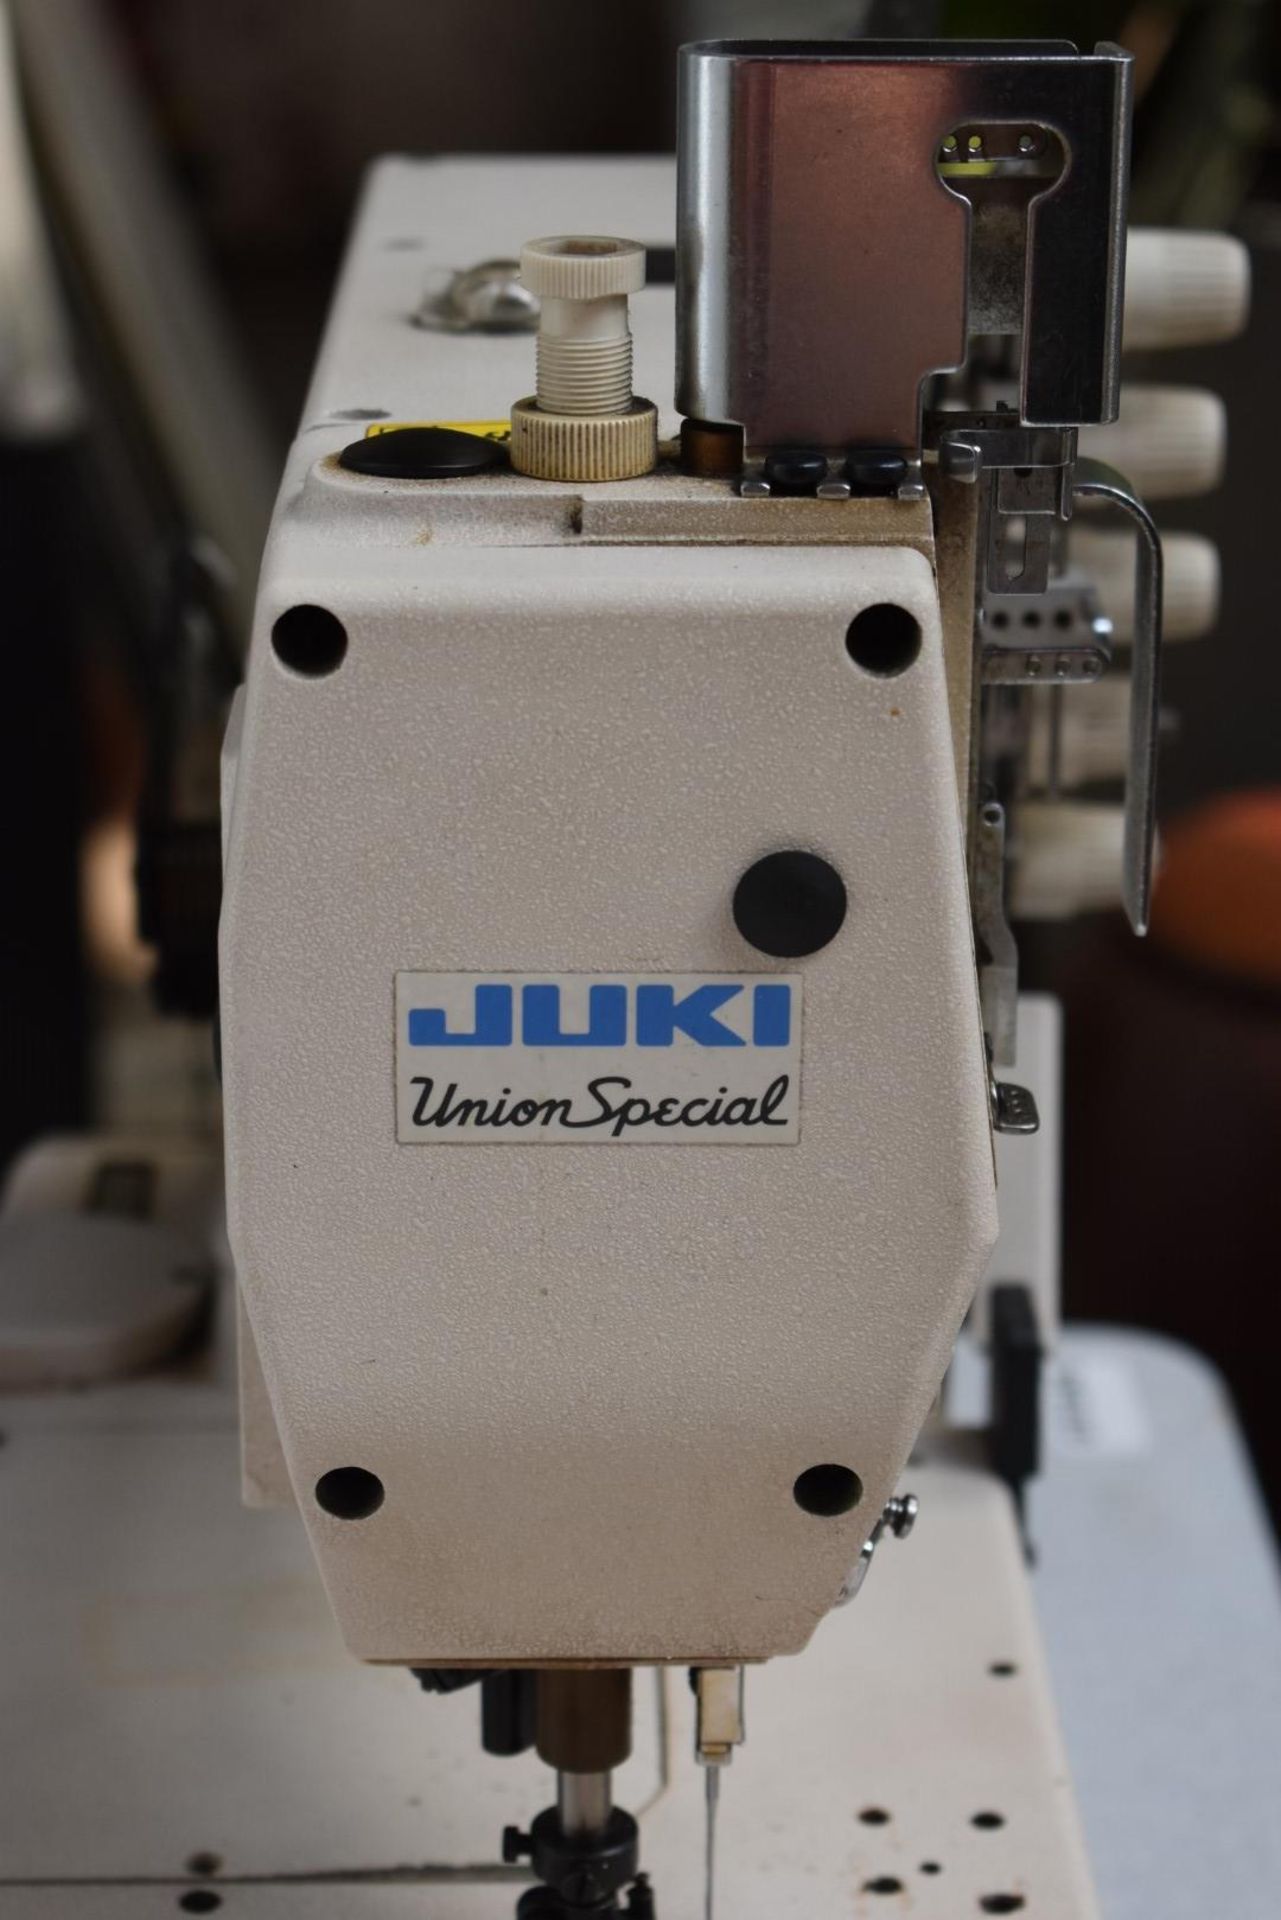 1 x Juki Union Special High-Speed Flat Bed Industrial Sewing Machine - Model FS332H01-3B56 - Image 20 of 30